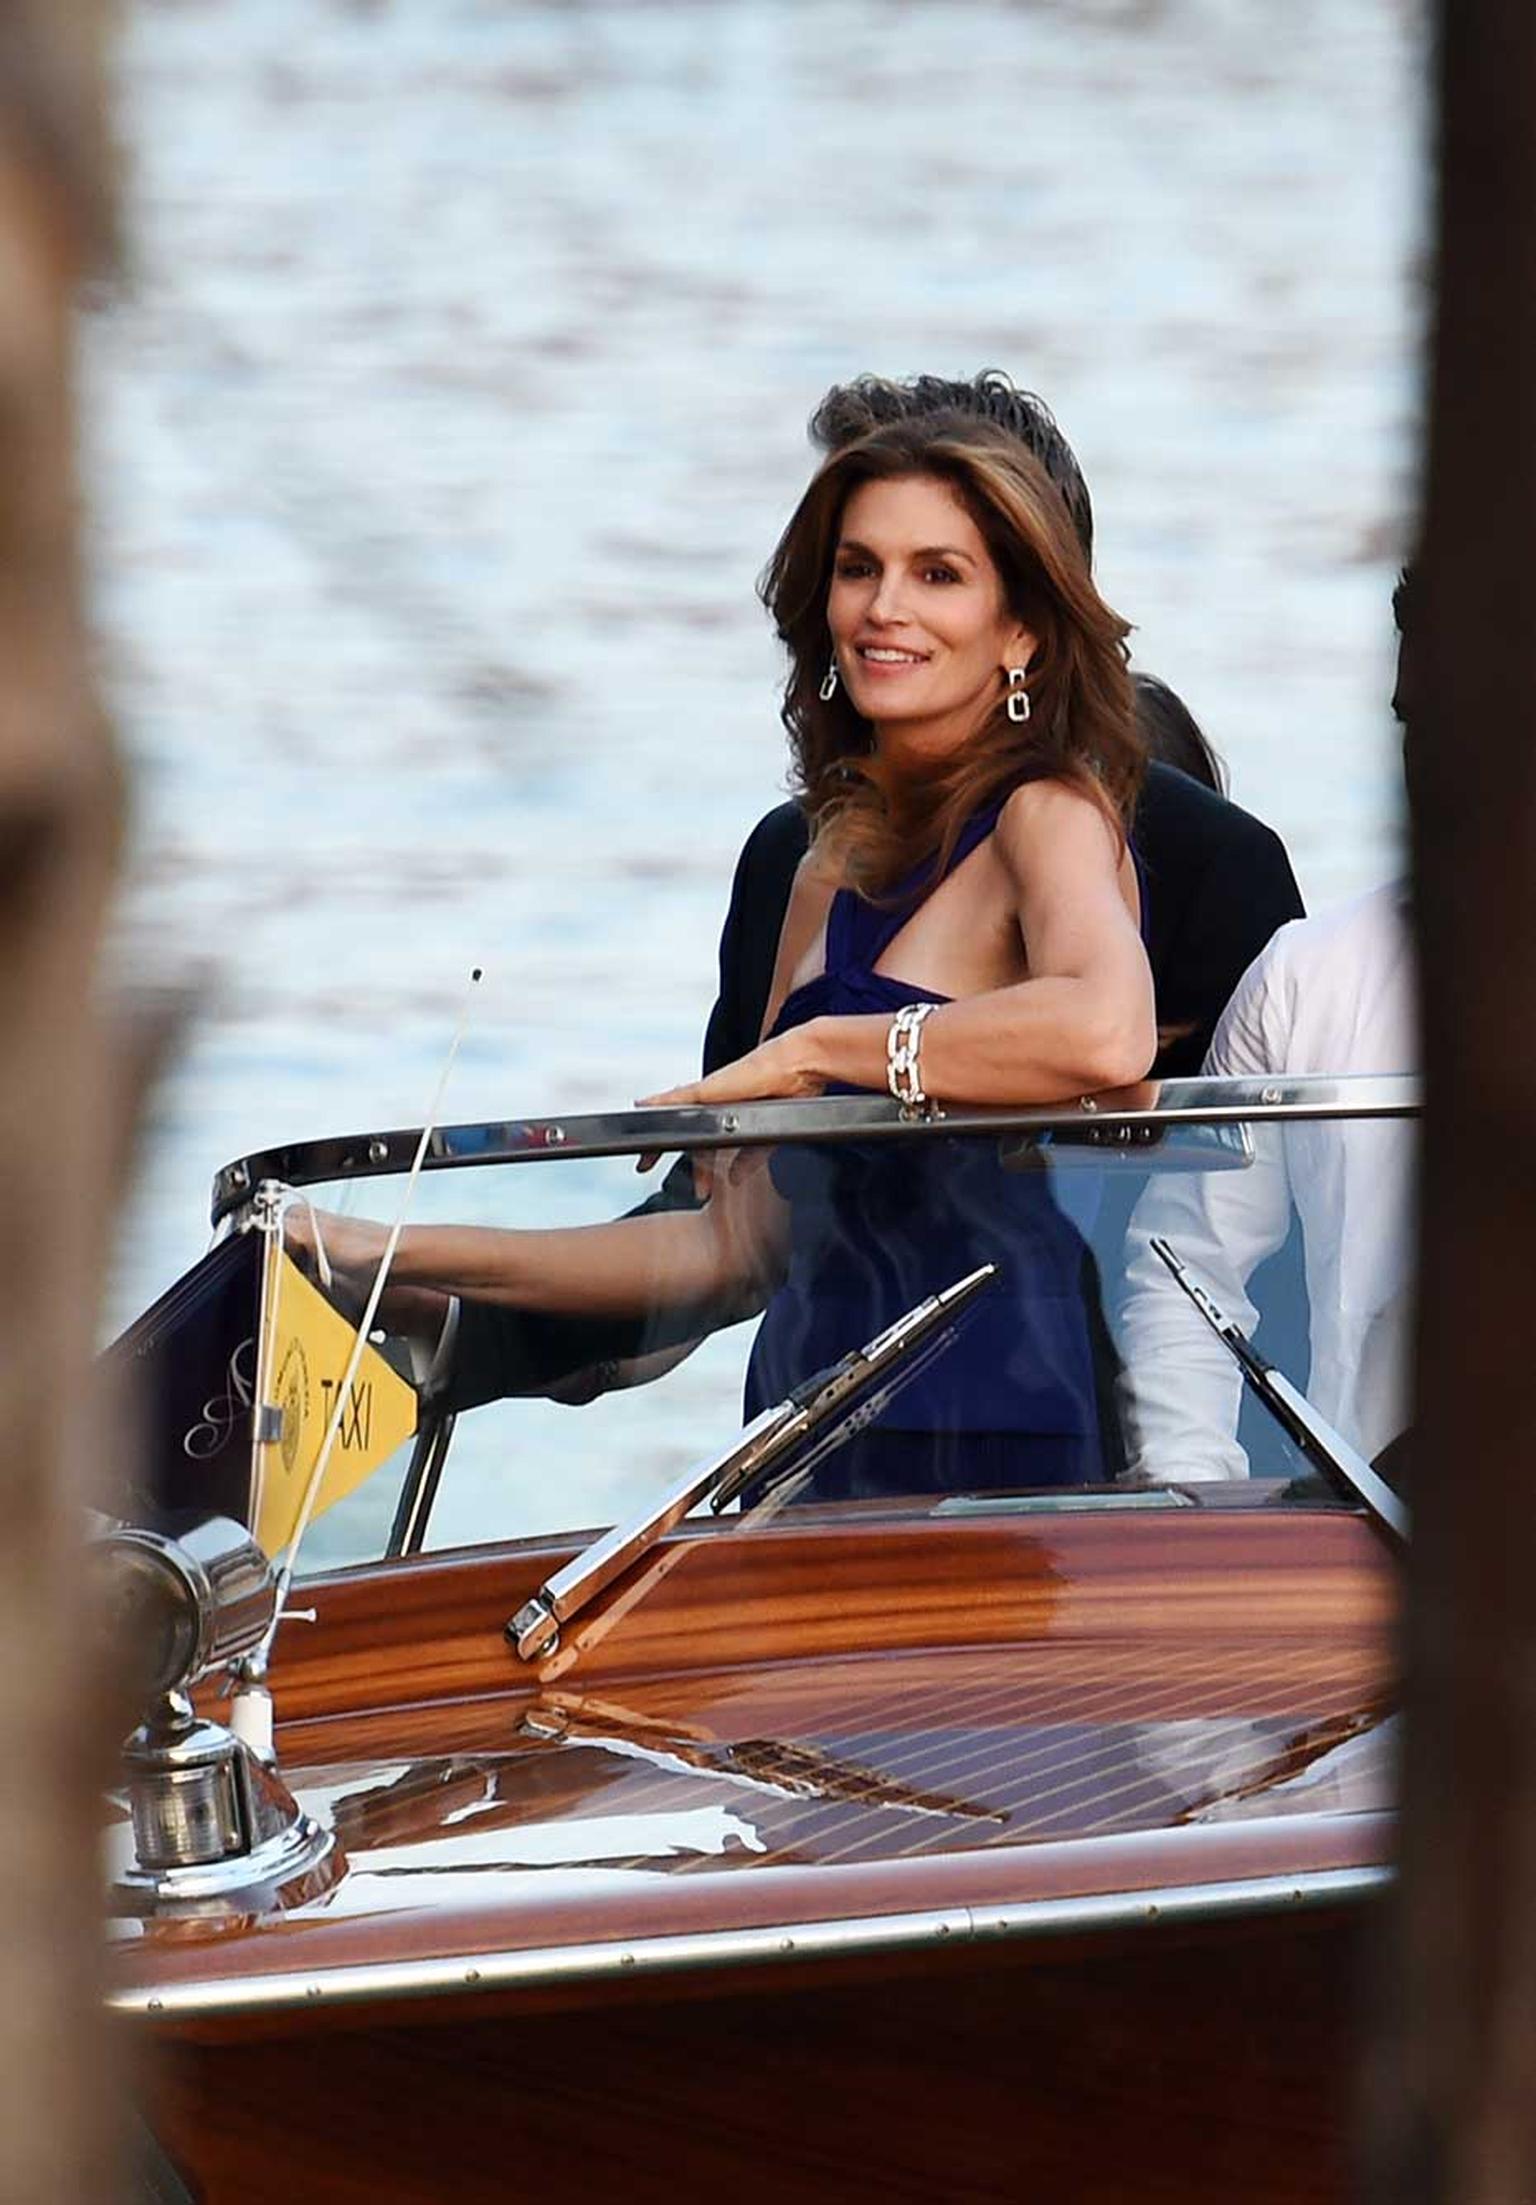 Cindy Crawford was one of many celebrity guests who celebrated the marriage of the world's most eligible bachelor, George Clooney, to the British-Lebanese lawyer Amal Alamuddin this weekend in Venice, accessorised with a generous sprinkling of Harry Winst